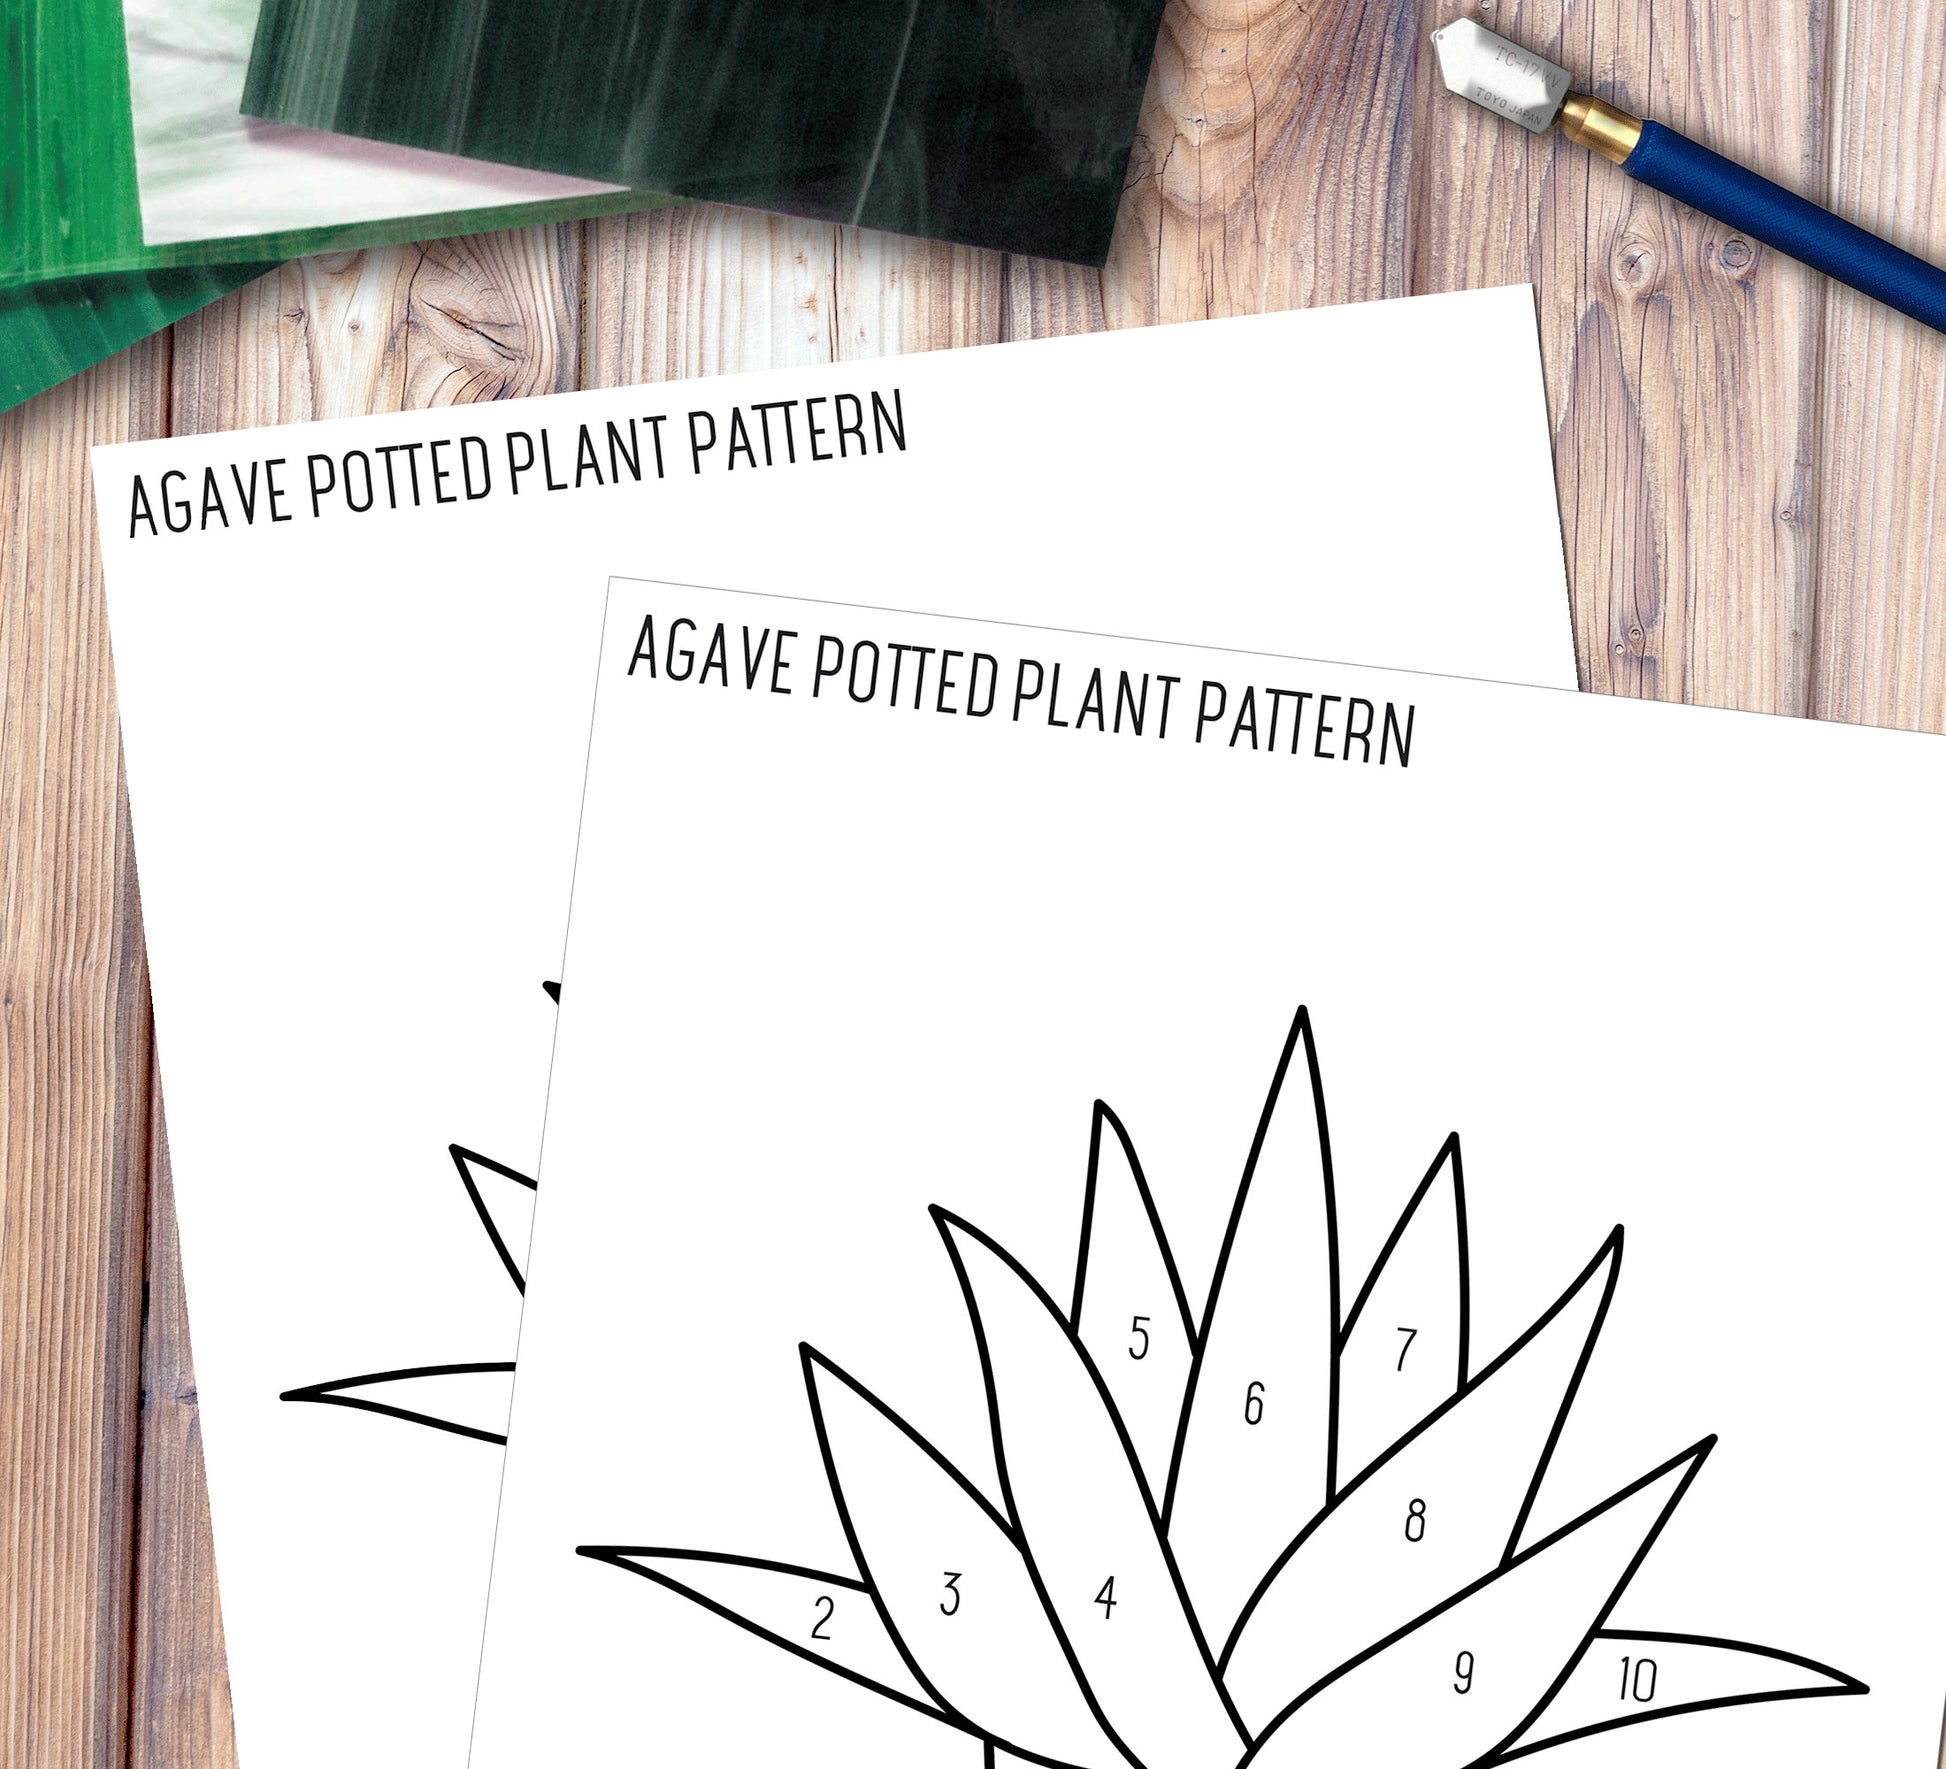 Sample of the clean and numbered stained glass patterns included with purchase of the beginner agave plant pot download